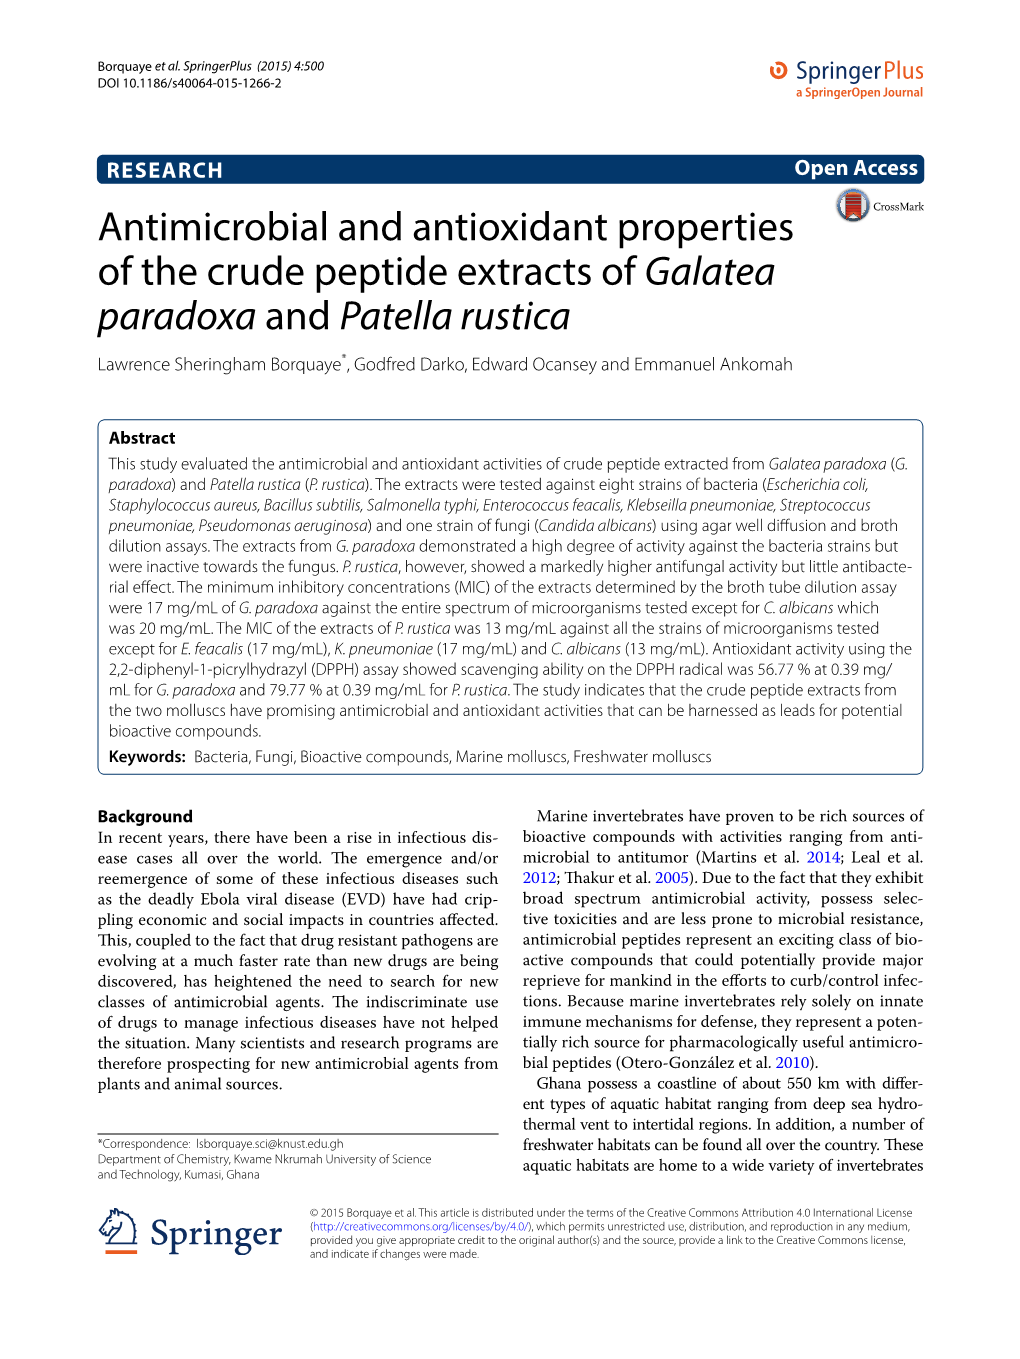 Antimicrobial and Antioxidant Properties of the Crude Peptide